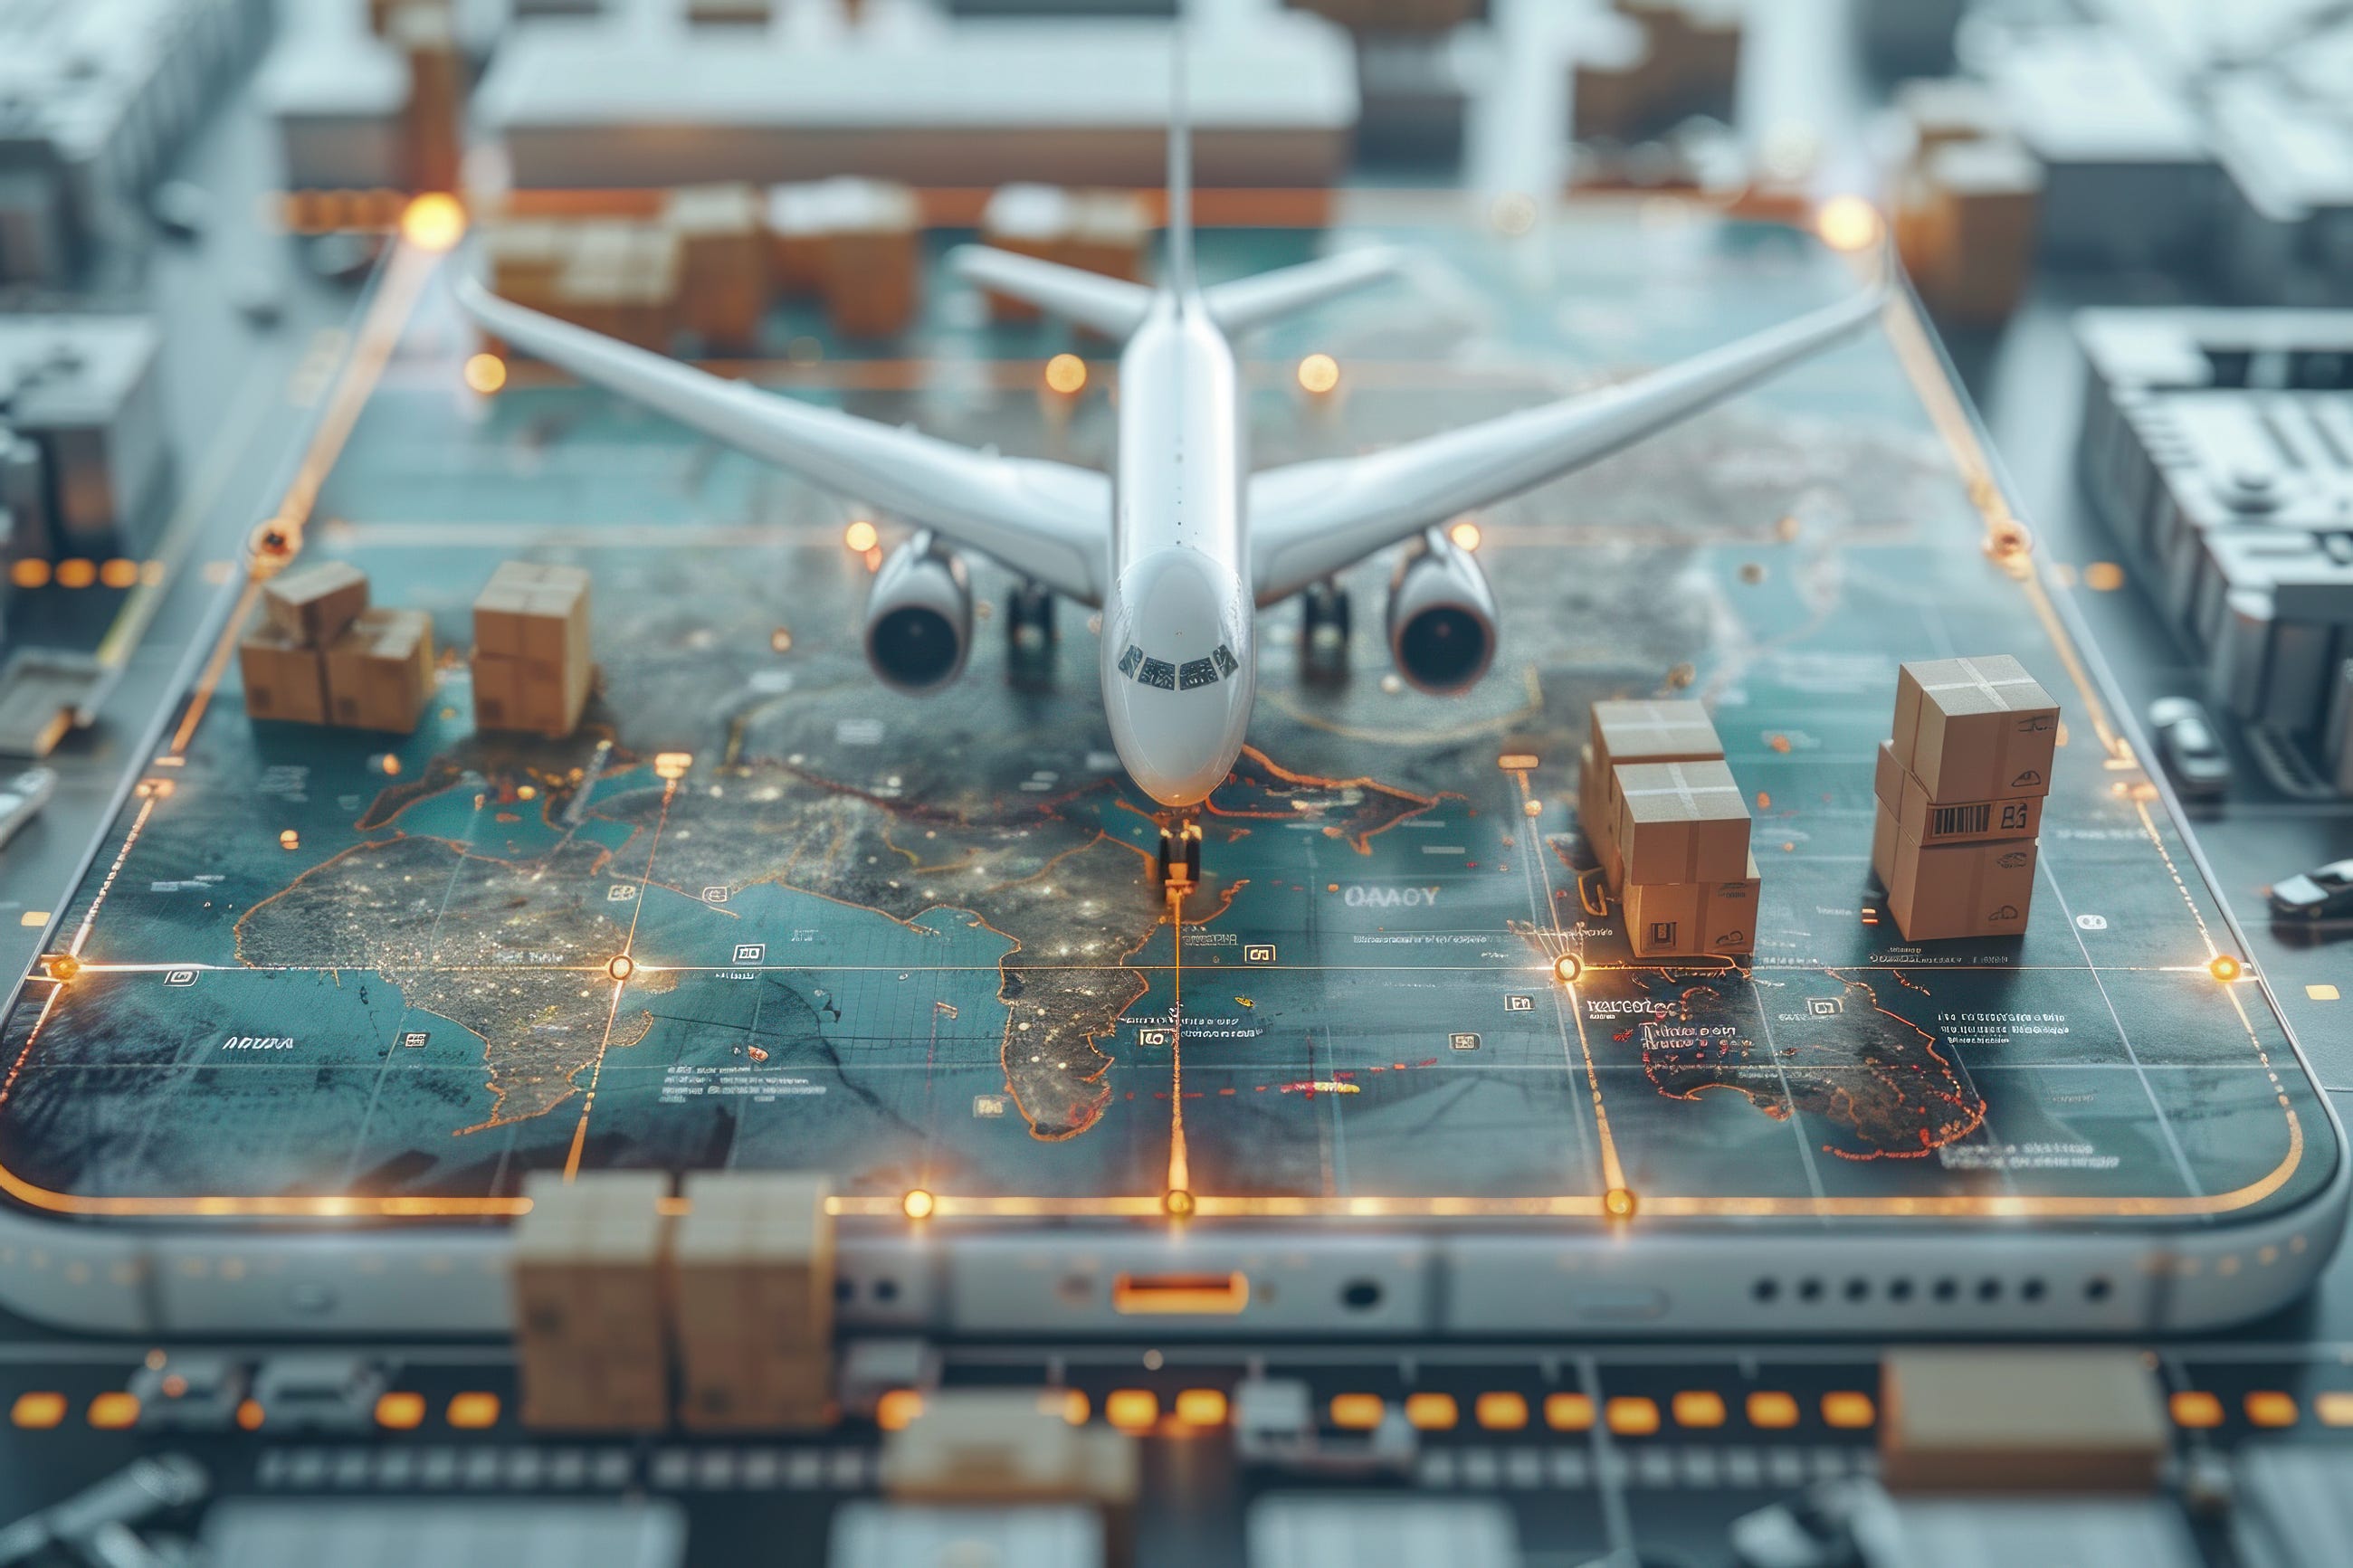 Building Reliable Embedded Hardware for Aerospace Applications